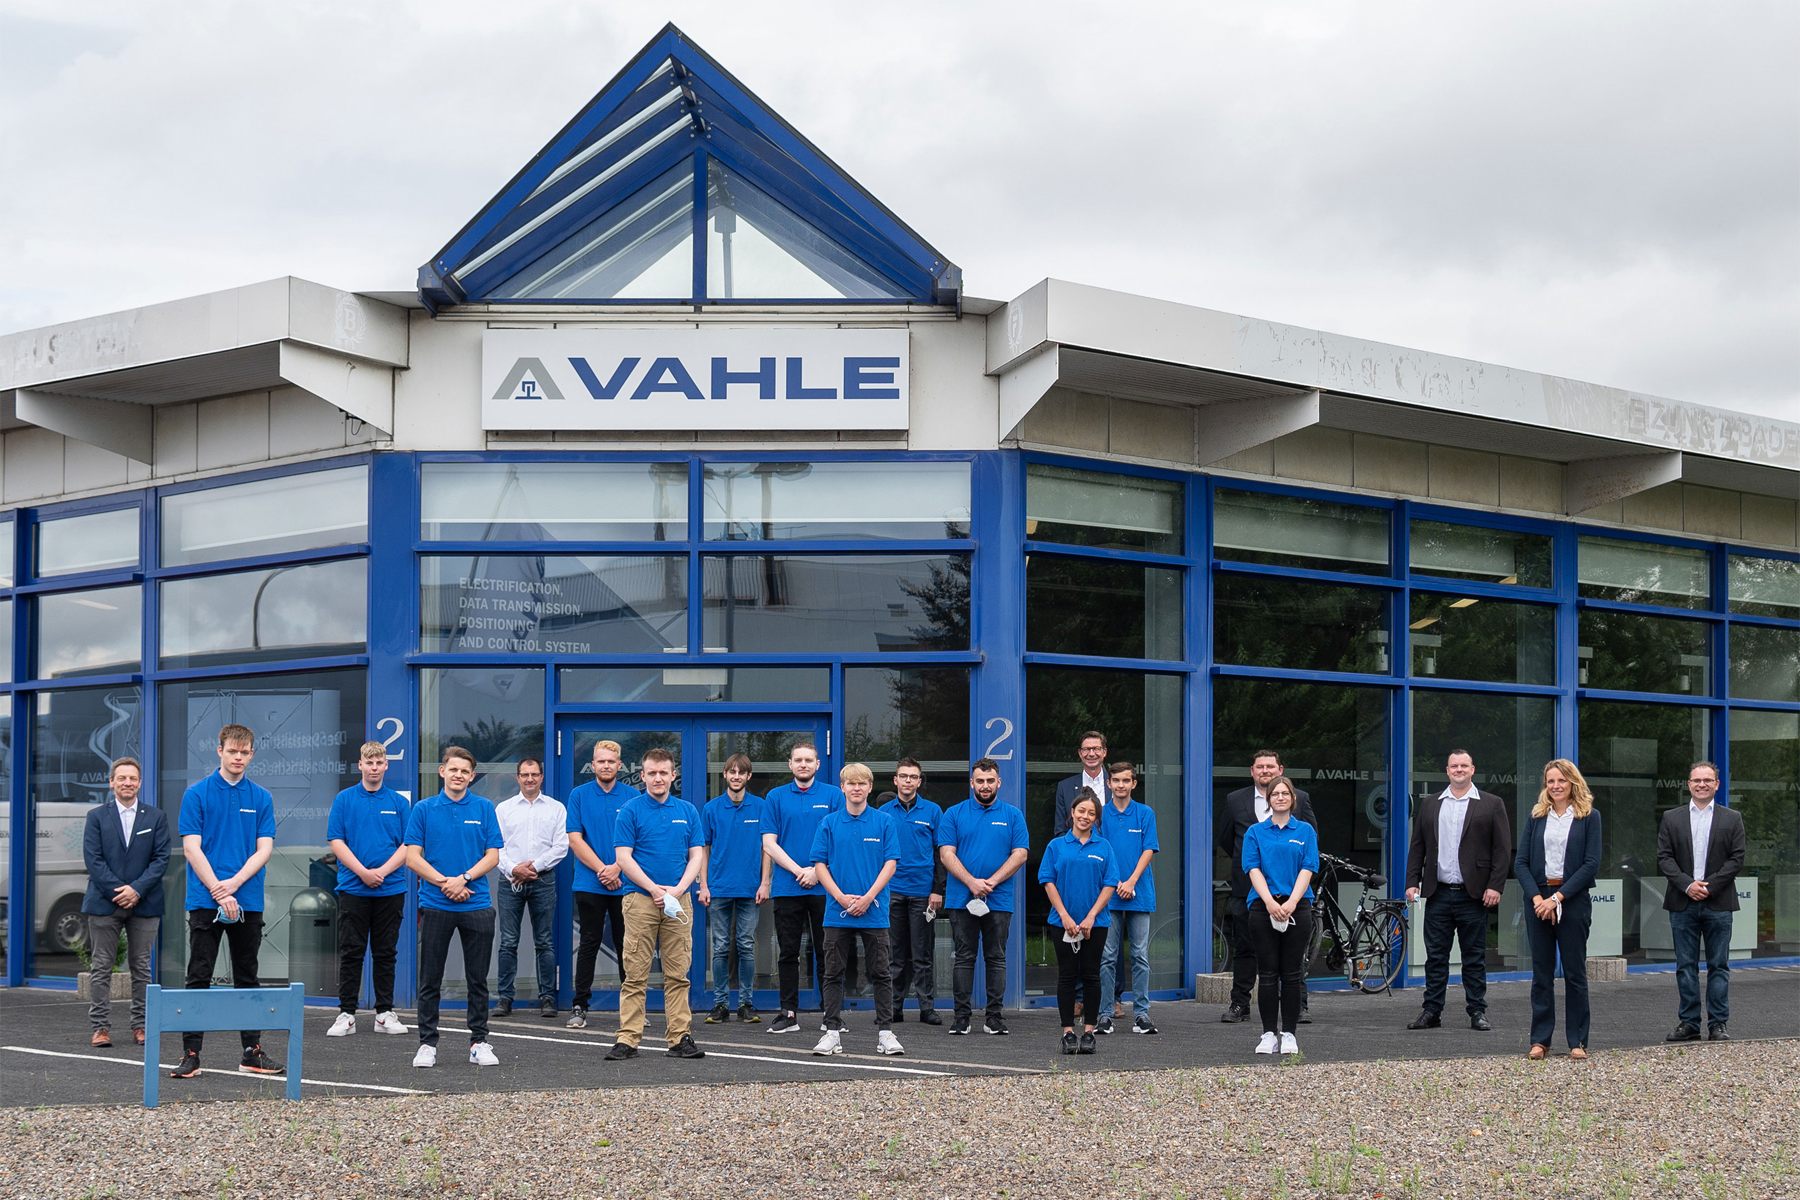 13 apprentices started their careers today at Paul Vahle GmbH & Co. KG into their professional lives. (Photo: VAHLE)